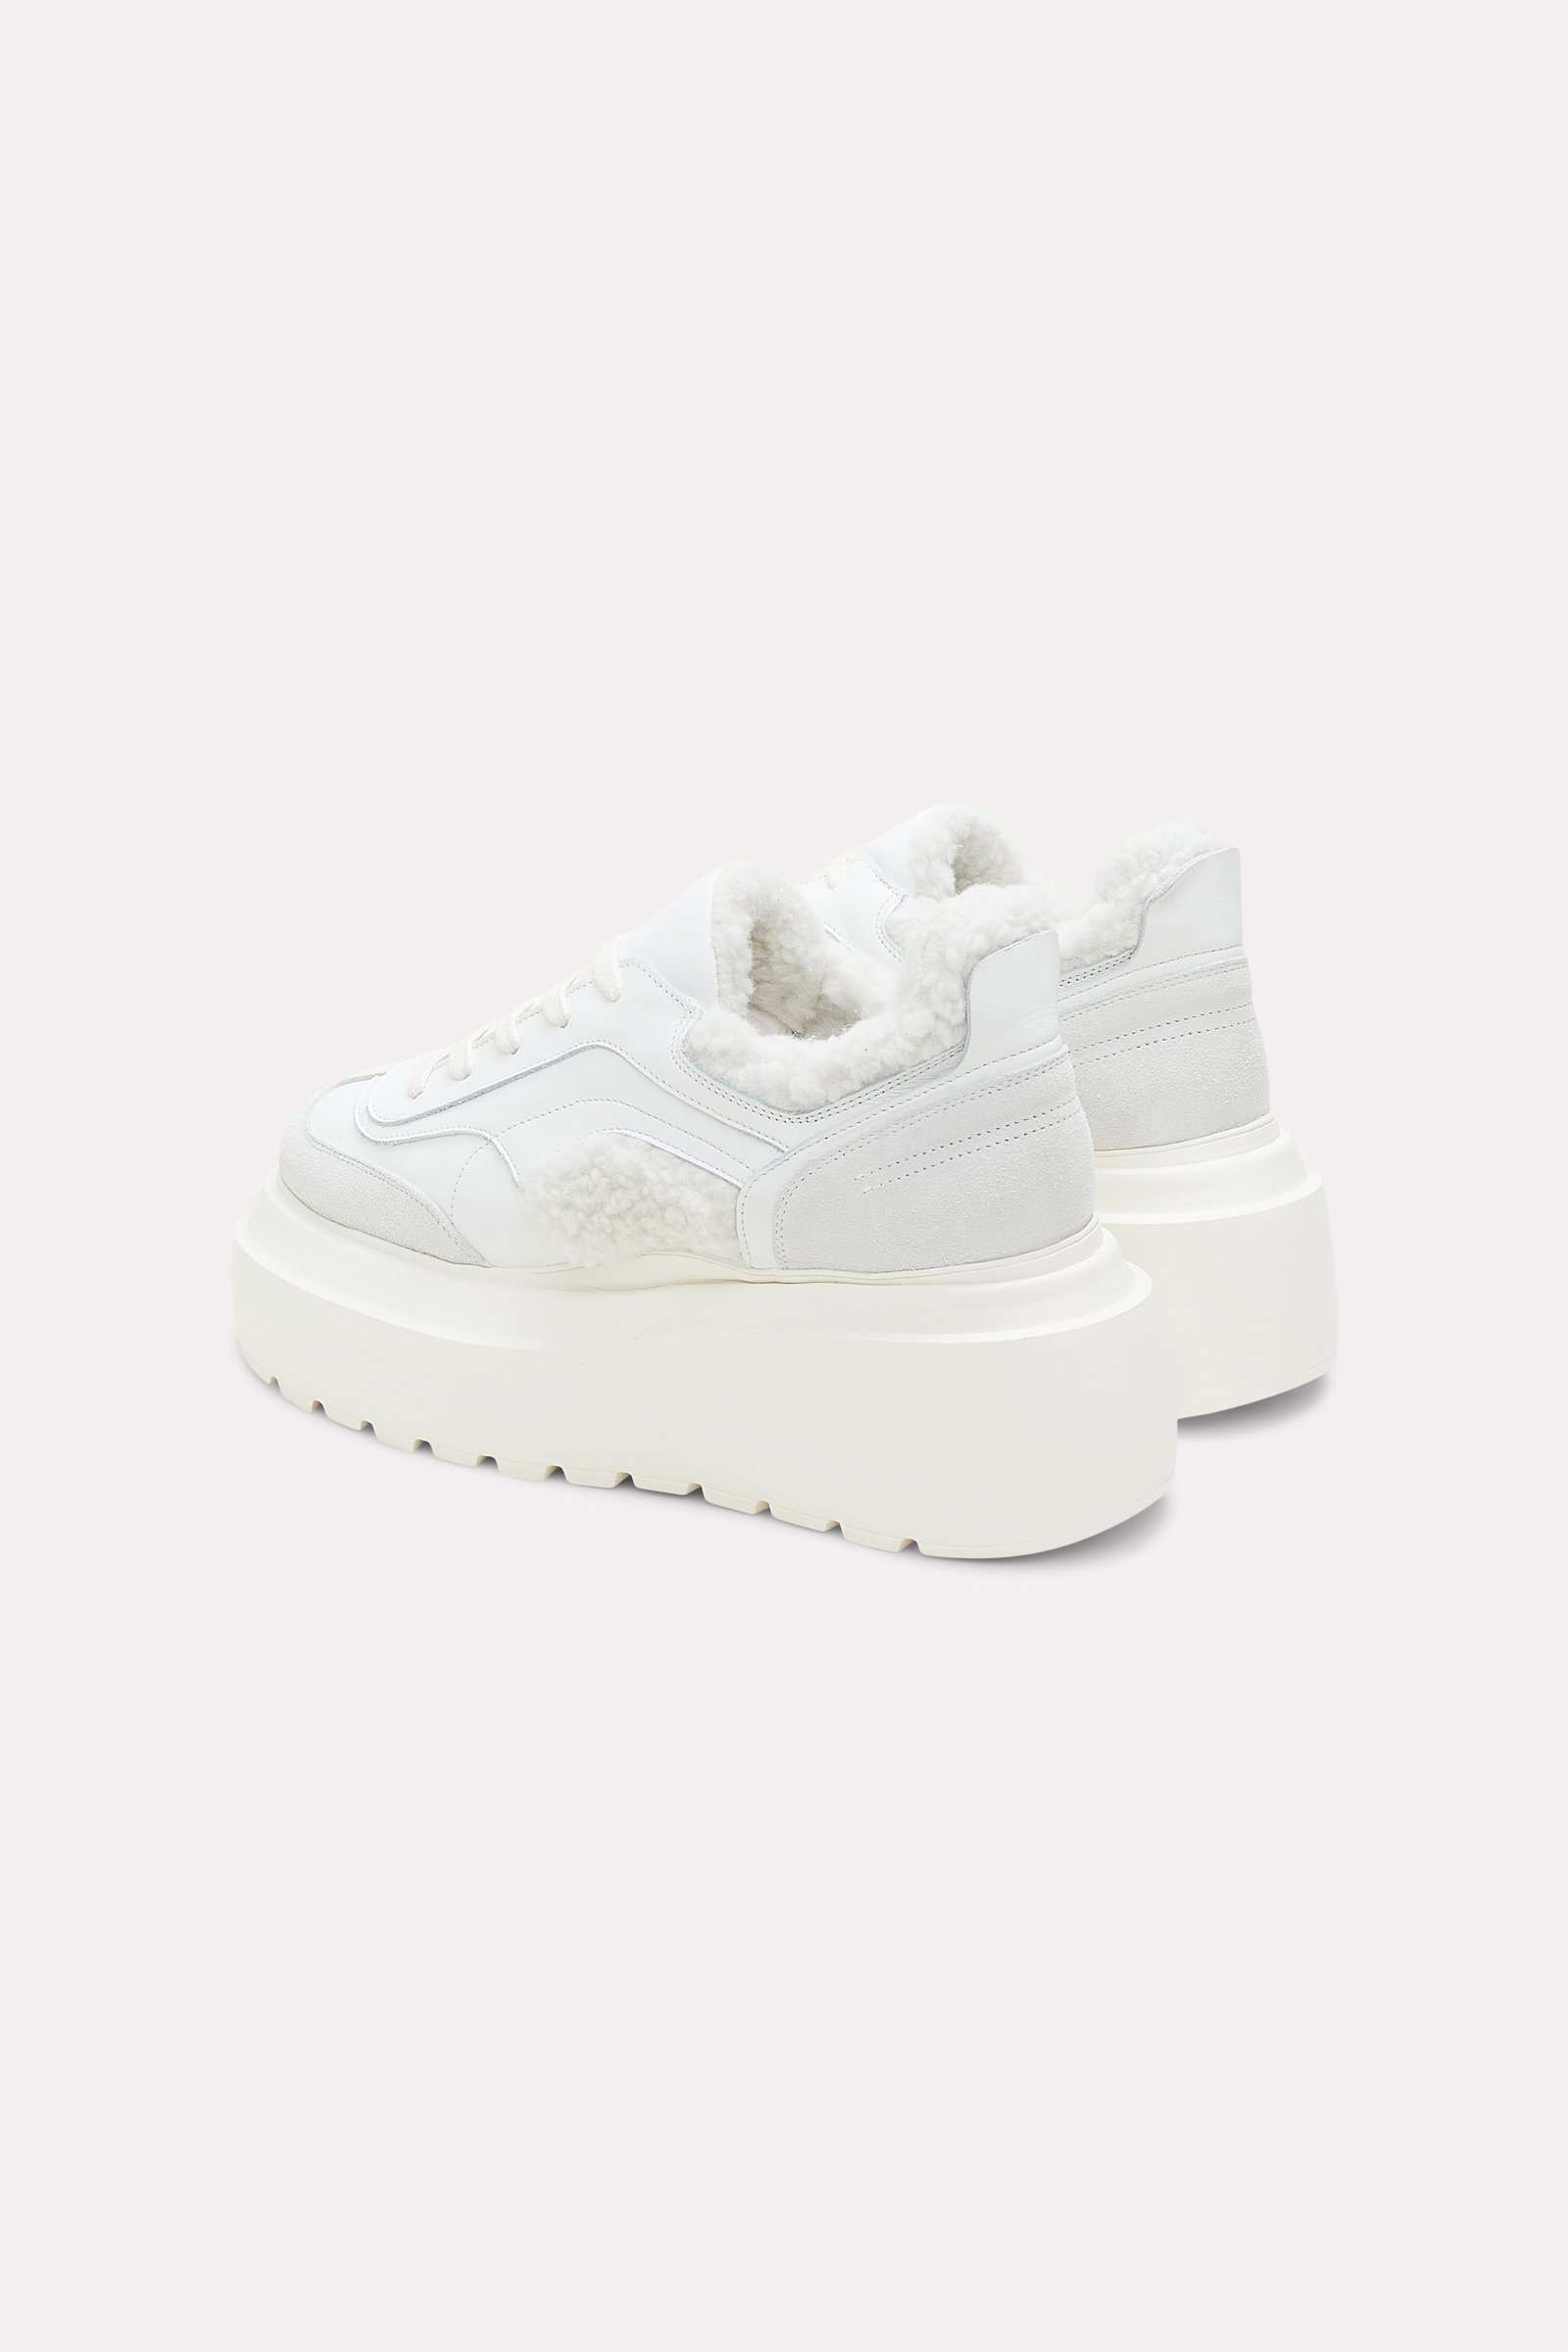 Dorothee Schumacher Mixed material platform sneakers with shearling cool white